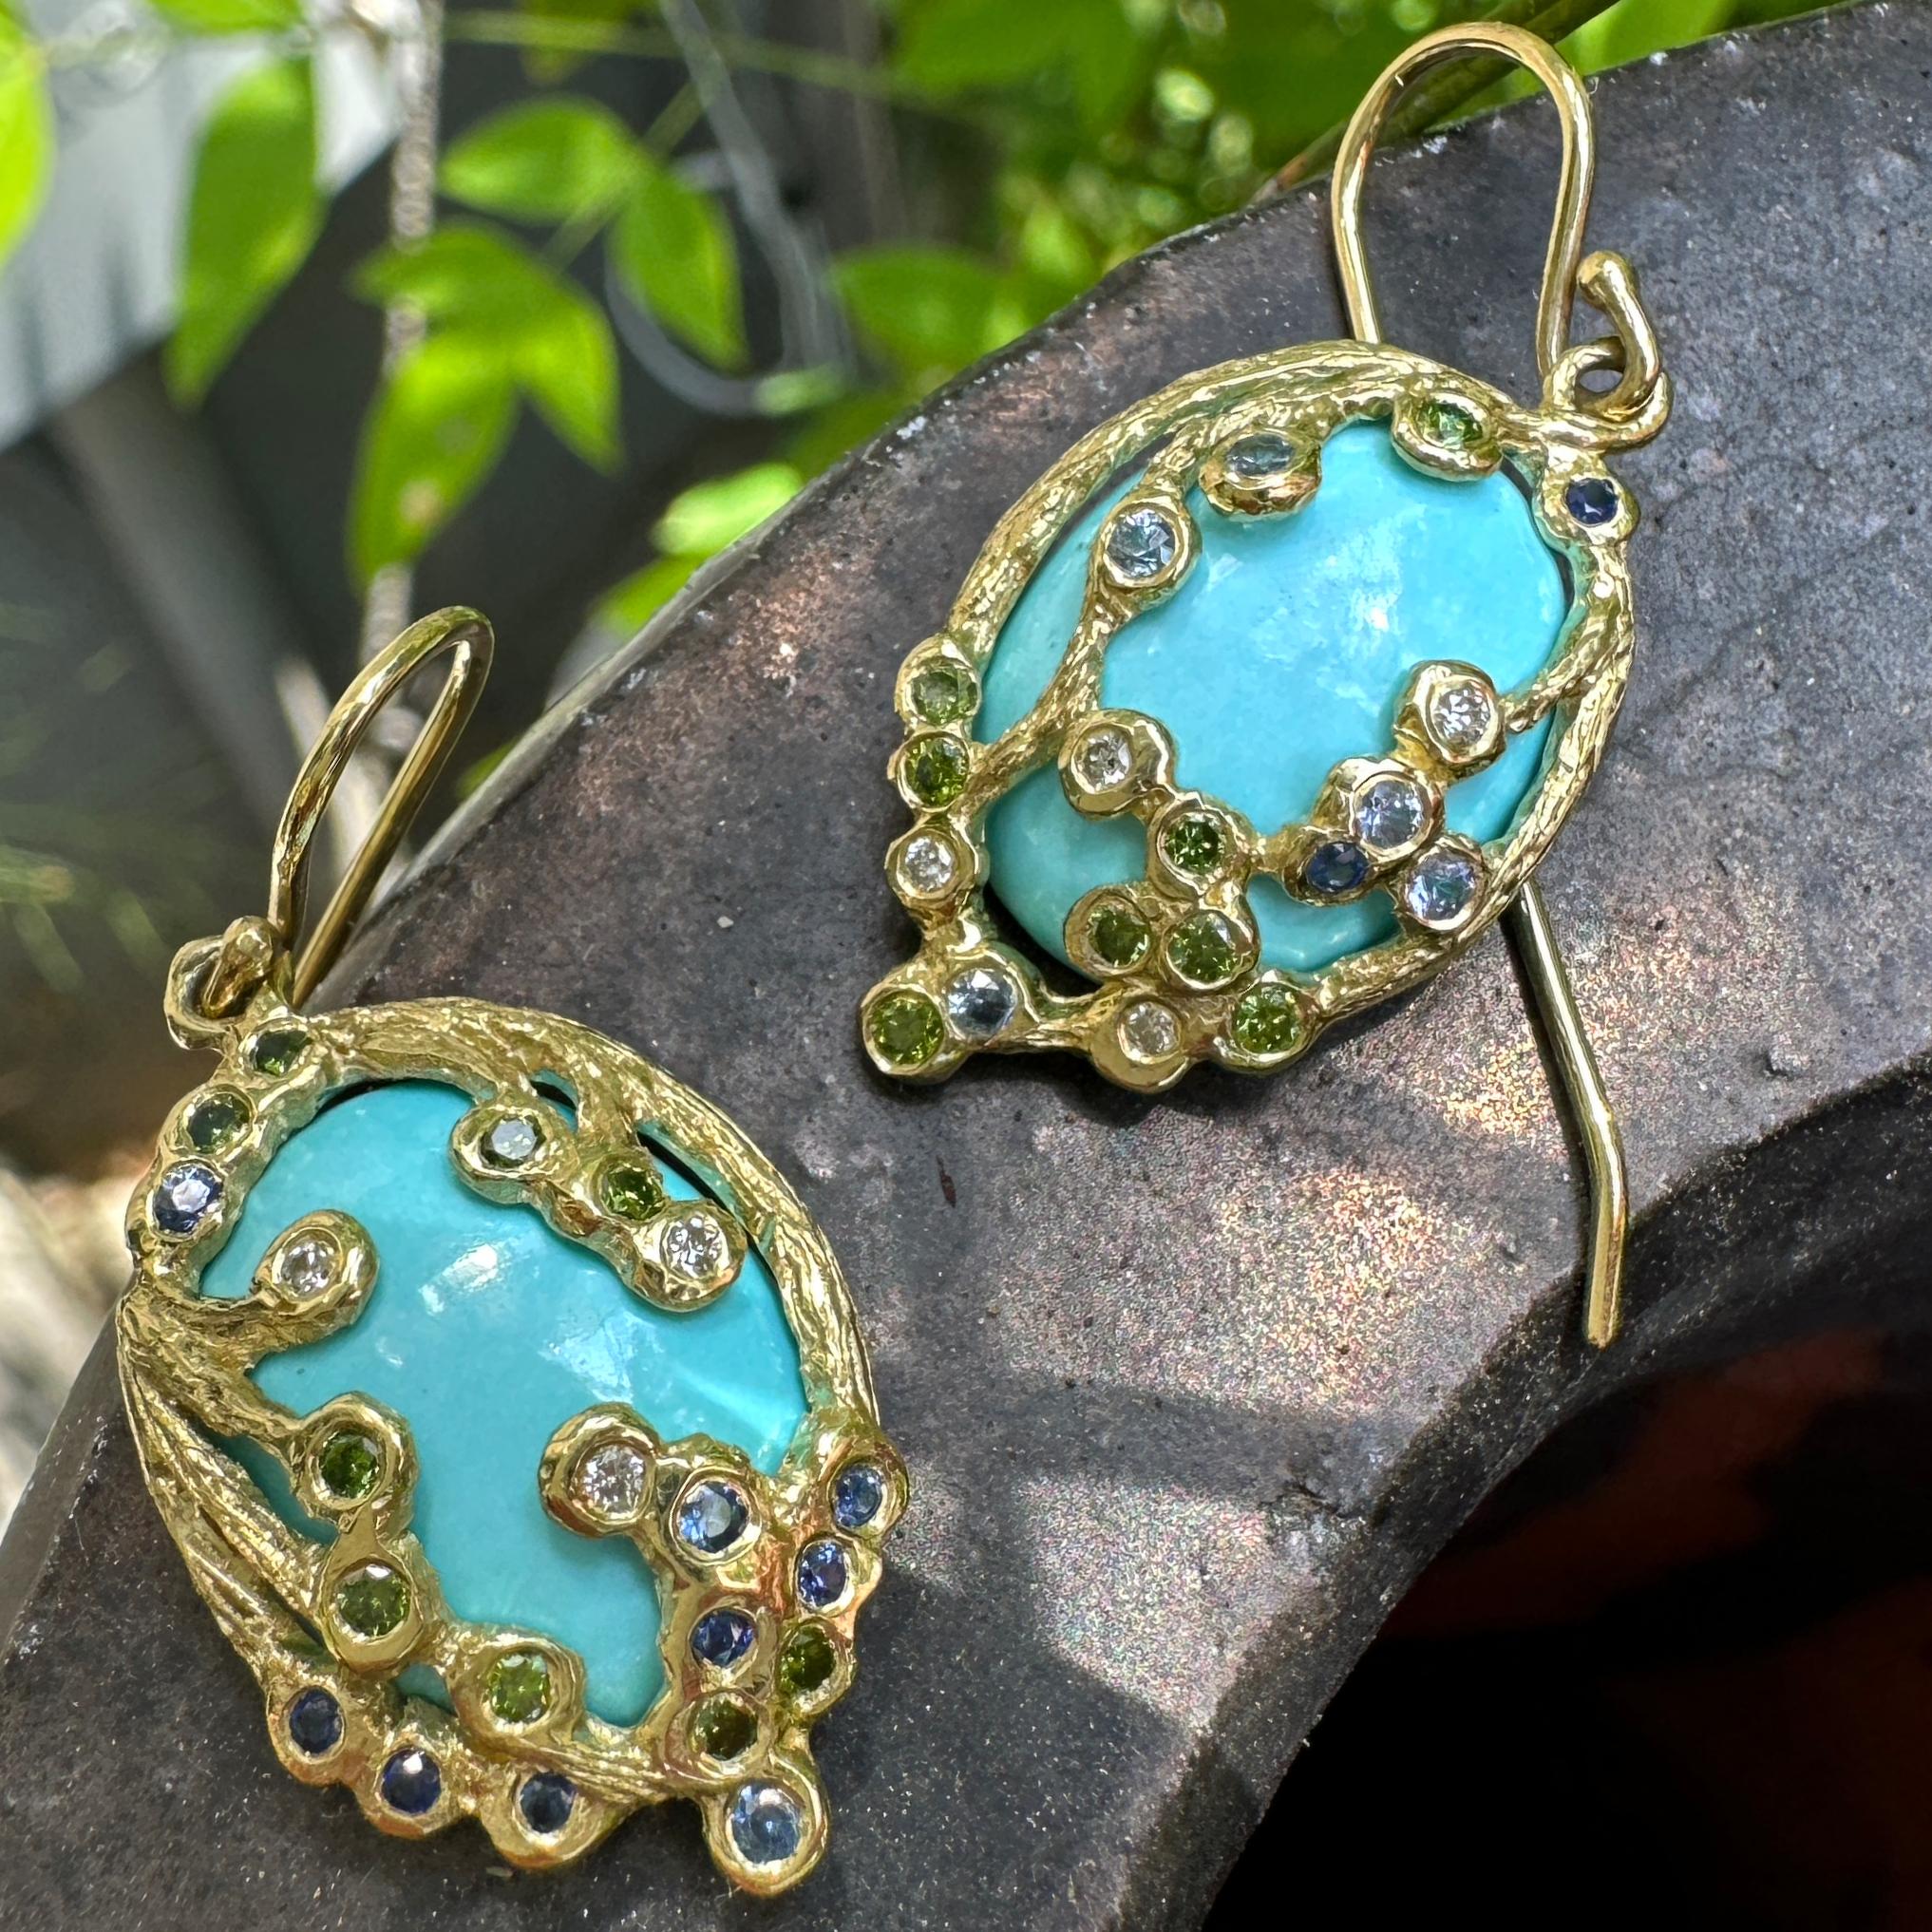 Cabochon Sleeping Beauty Turquoise Earrings in 18 Karat Gold with Diamonds & Sapphires For Sale